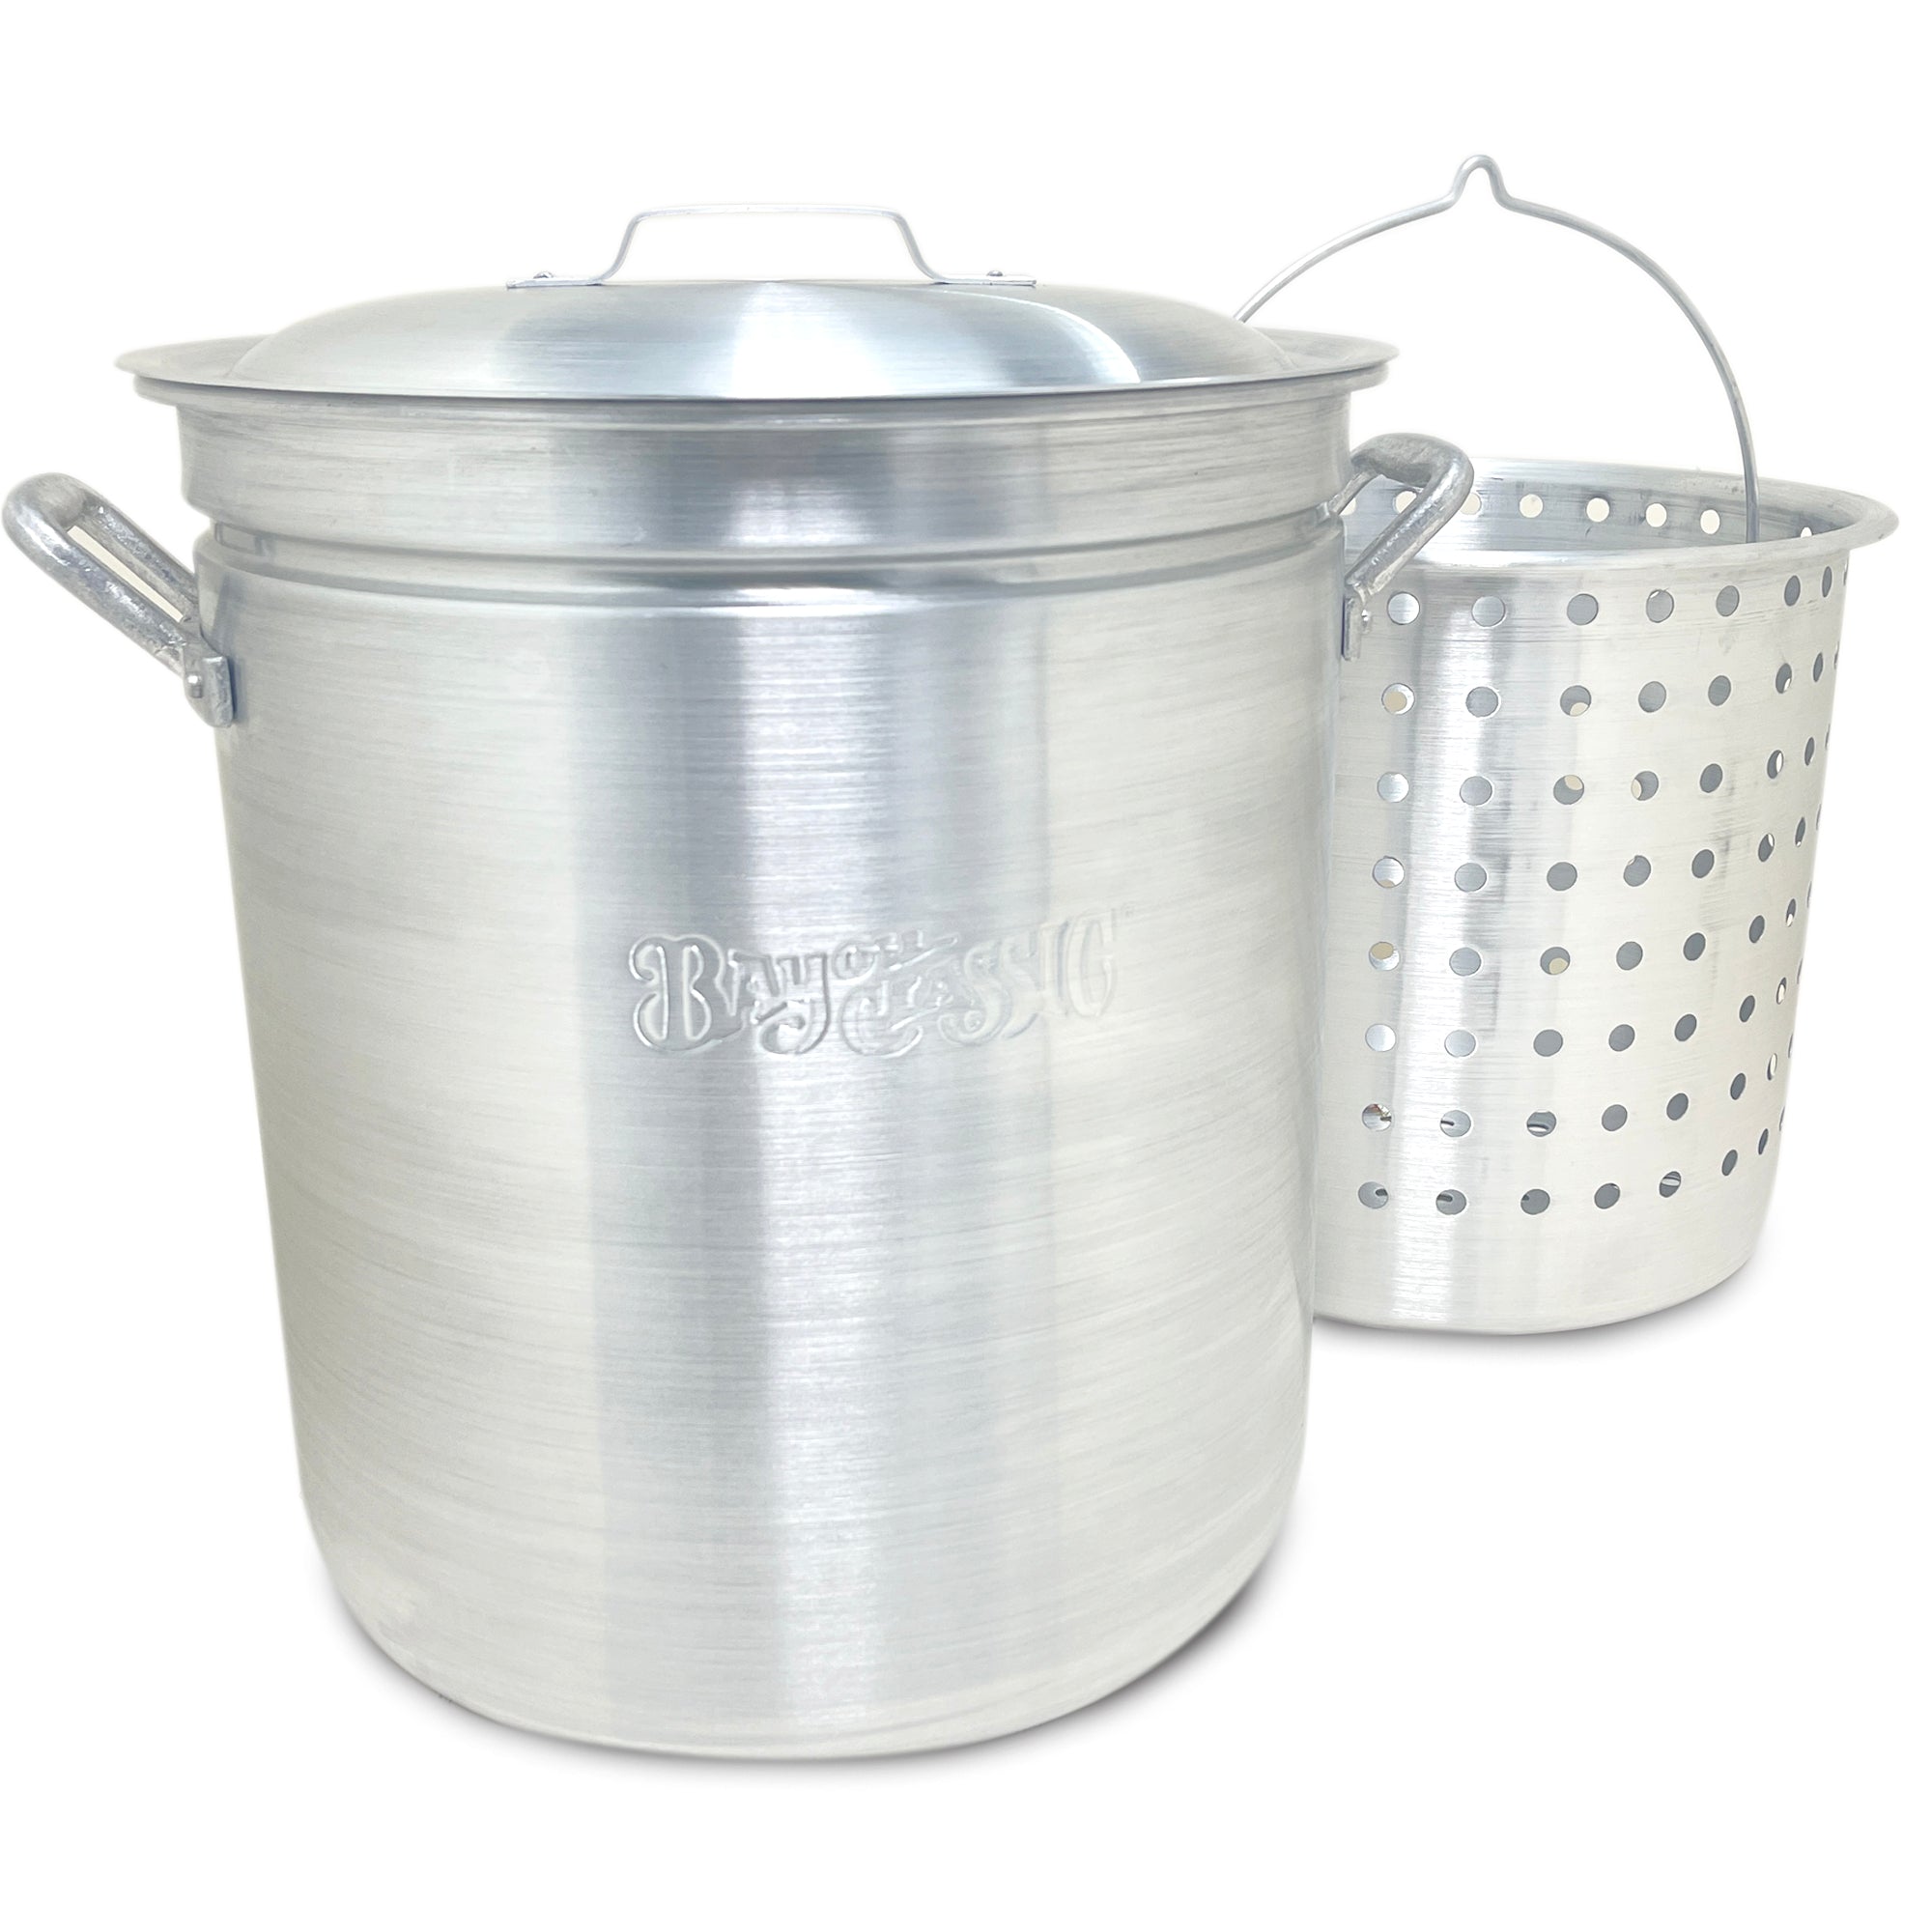 60-qt Aluminum Stockpot with Basket ~ a handcrafted classic